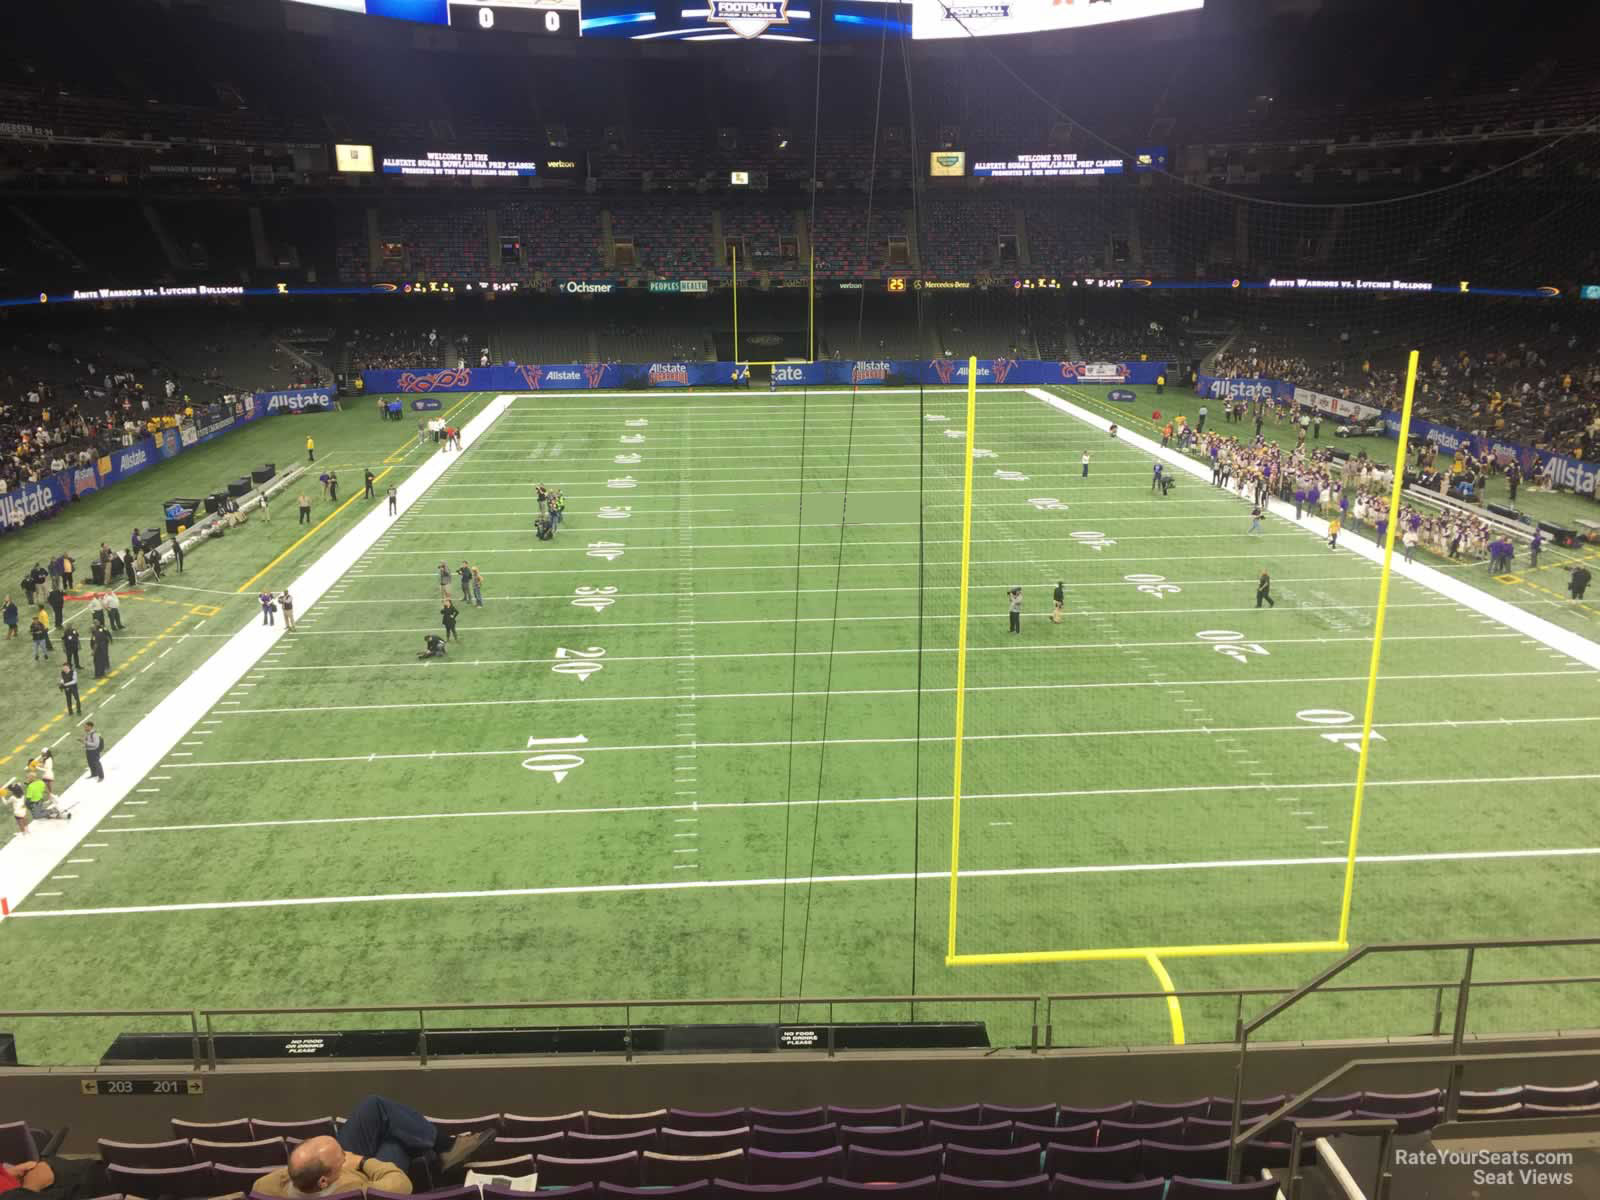 section 301, row 11 seat view  for football - caesars superdome